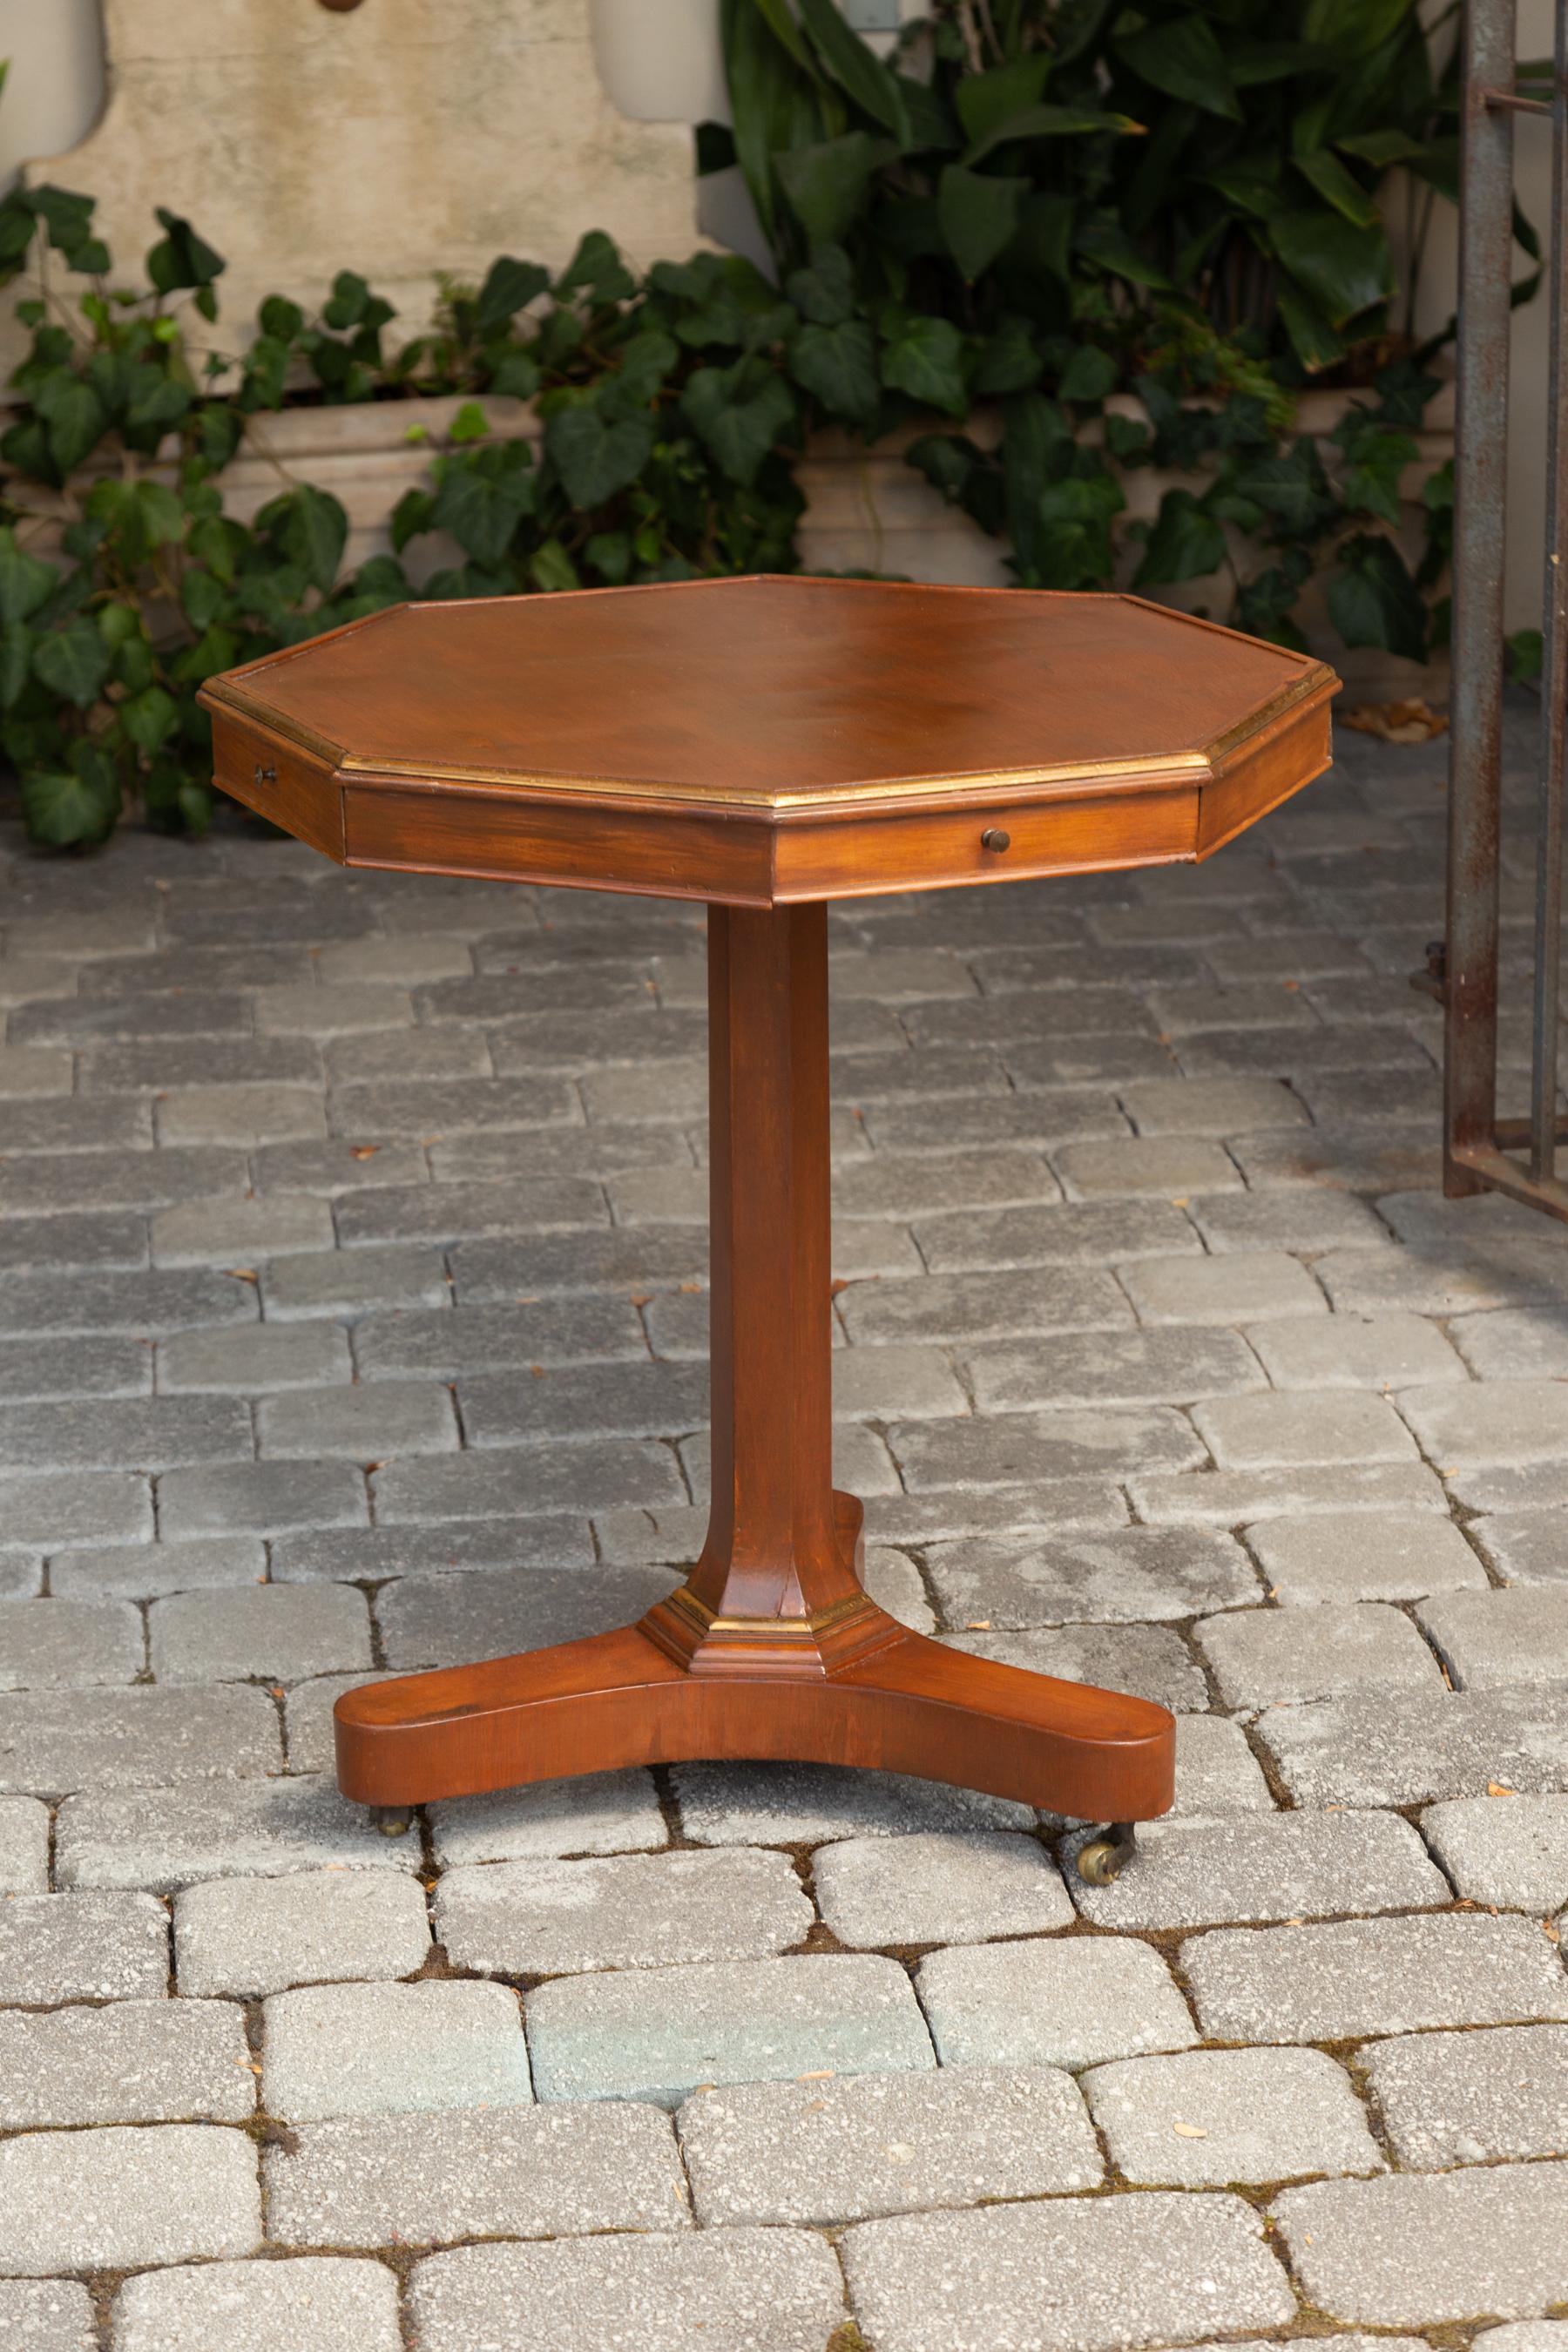 French 1870s Octagonal Walnut Pedestal Table with Four Drawers and Copper Trim 4